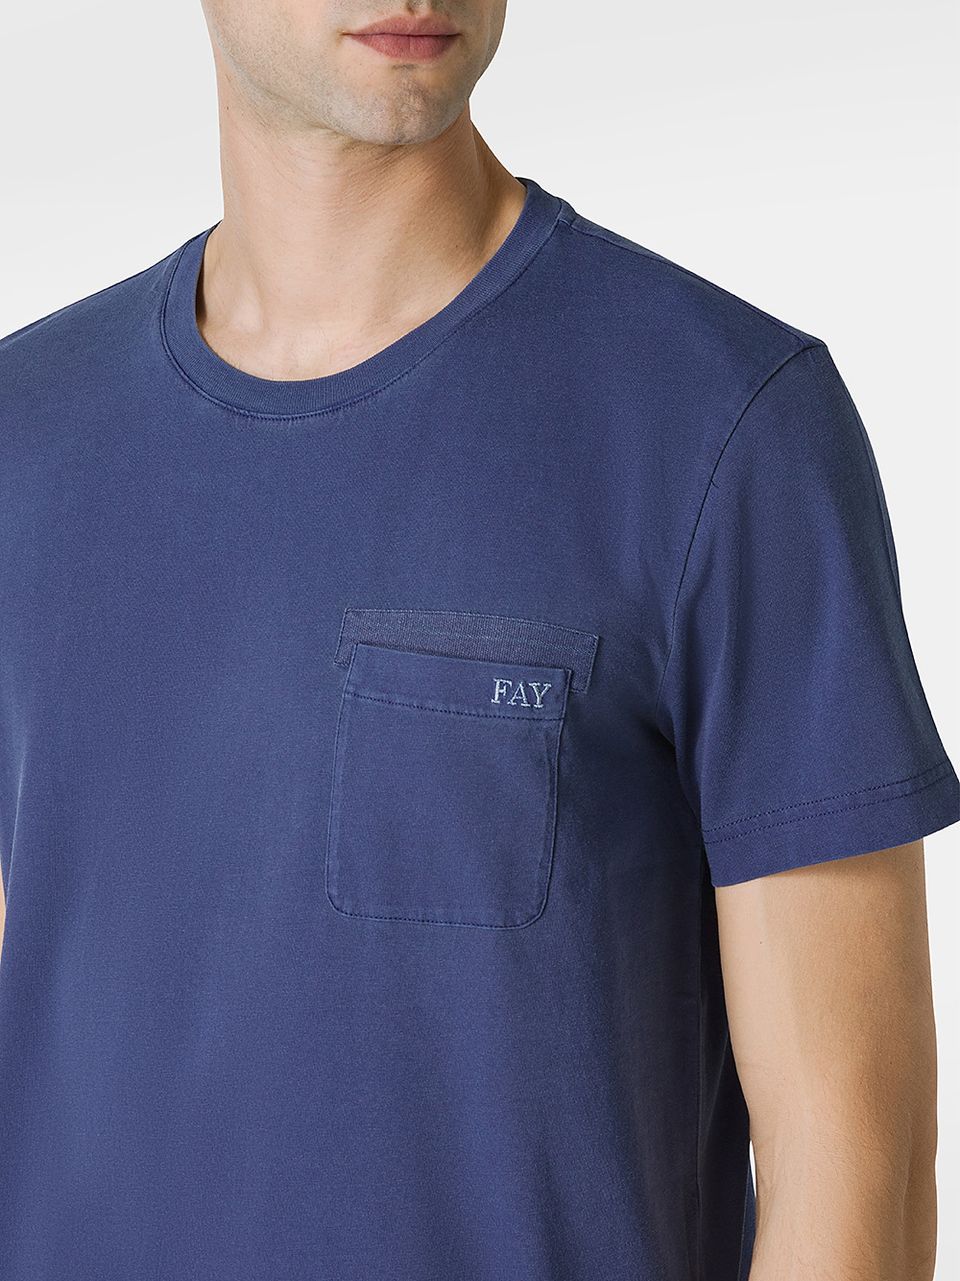 Cotton t-shirt with front pocket and logo